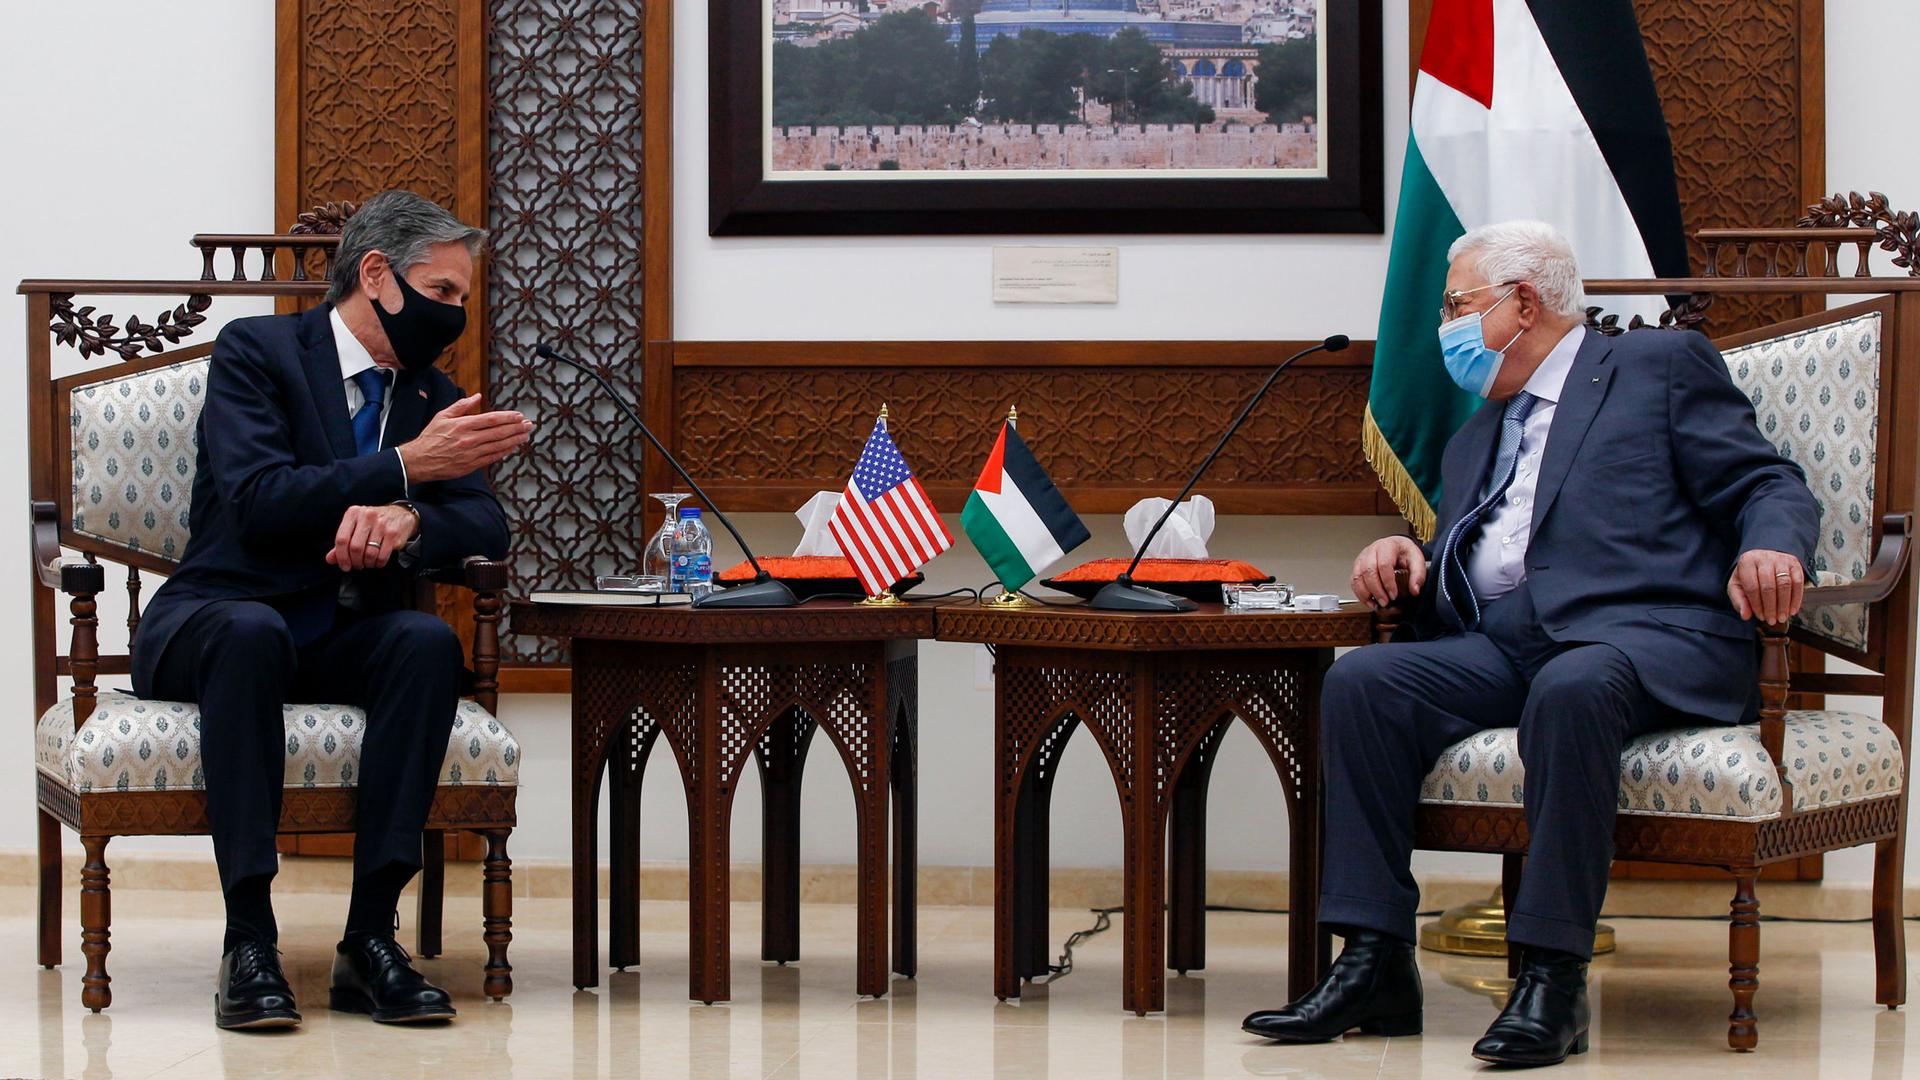 Palestinian President Mahmoud Abbas and US Secretary of State Antony Blinken are show sitting in opposite armchairs with two wooden side tables between them.